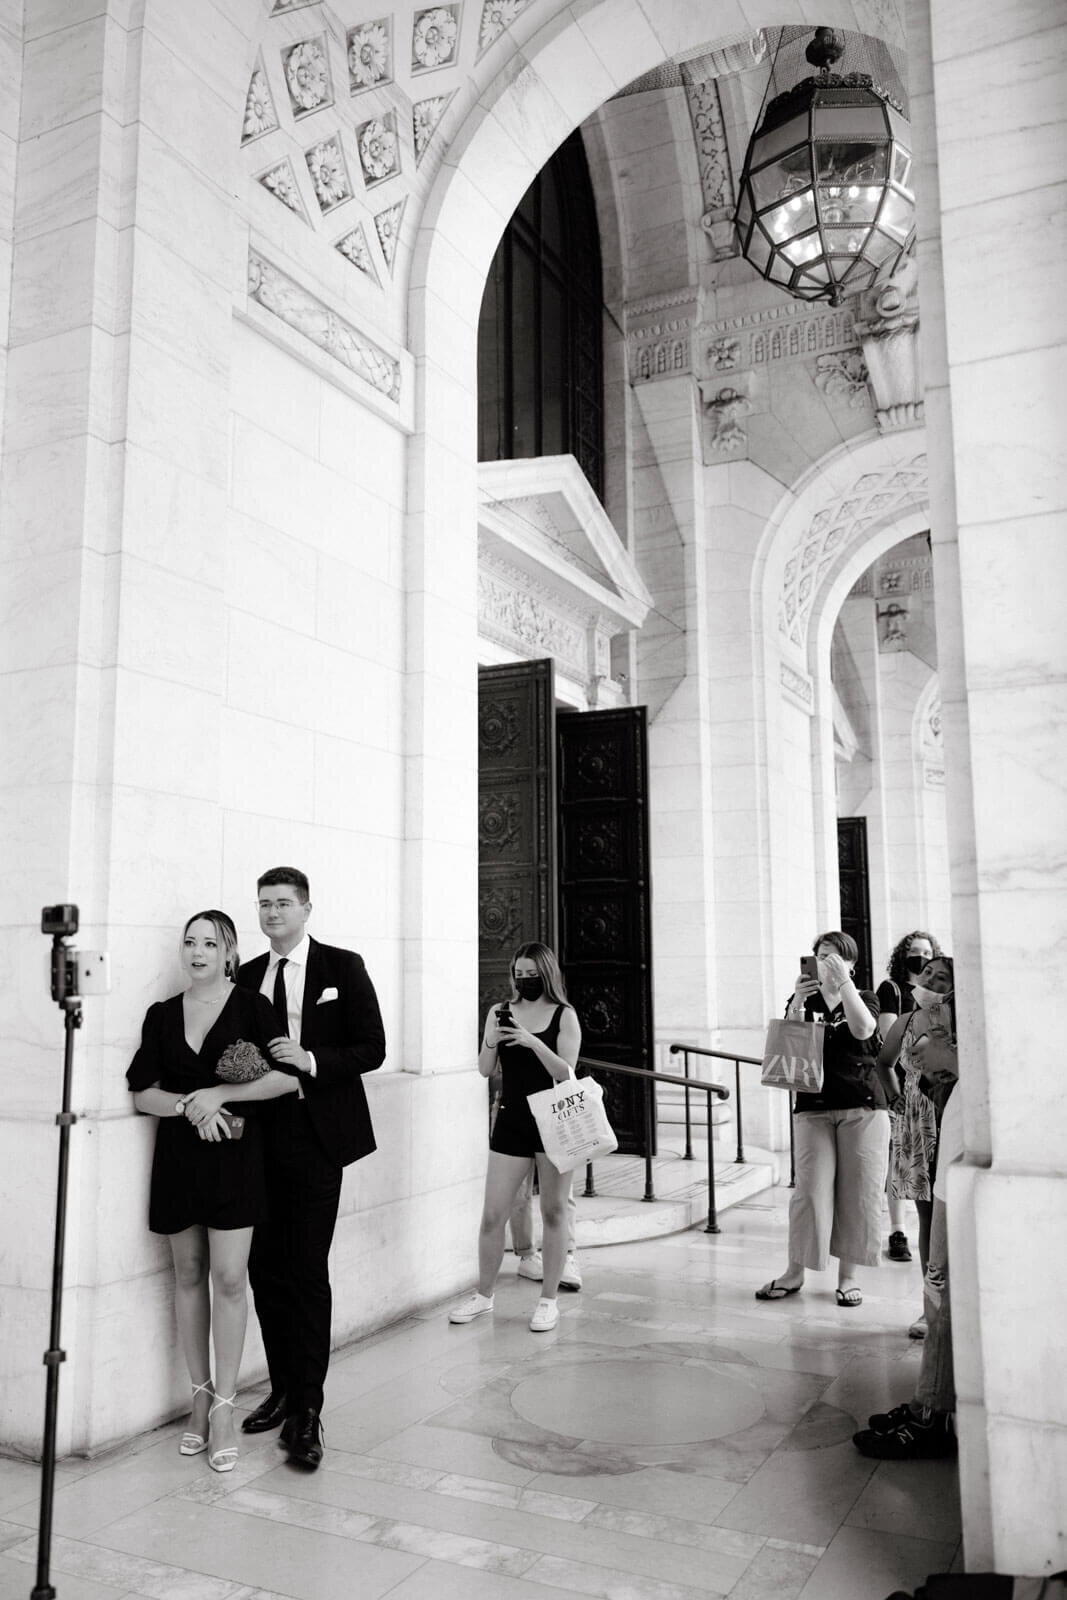 People are lining up at the New York Public Library's entrance. Image by Jenny Fu Studio